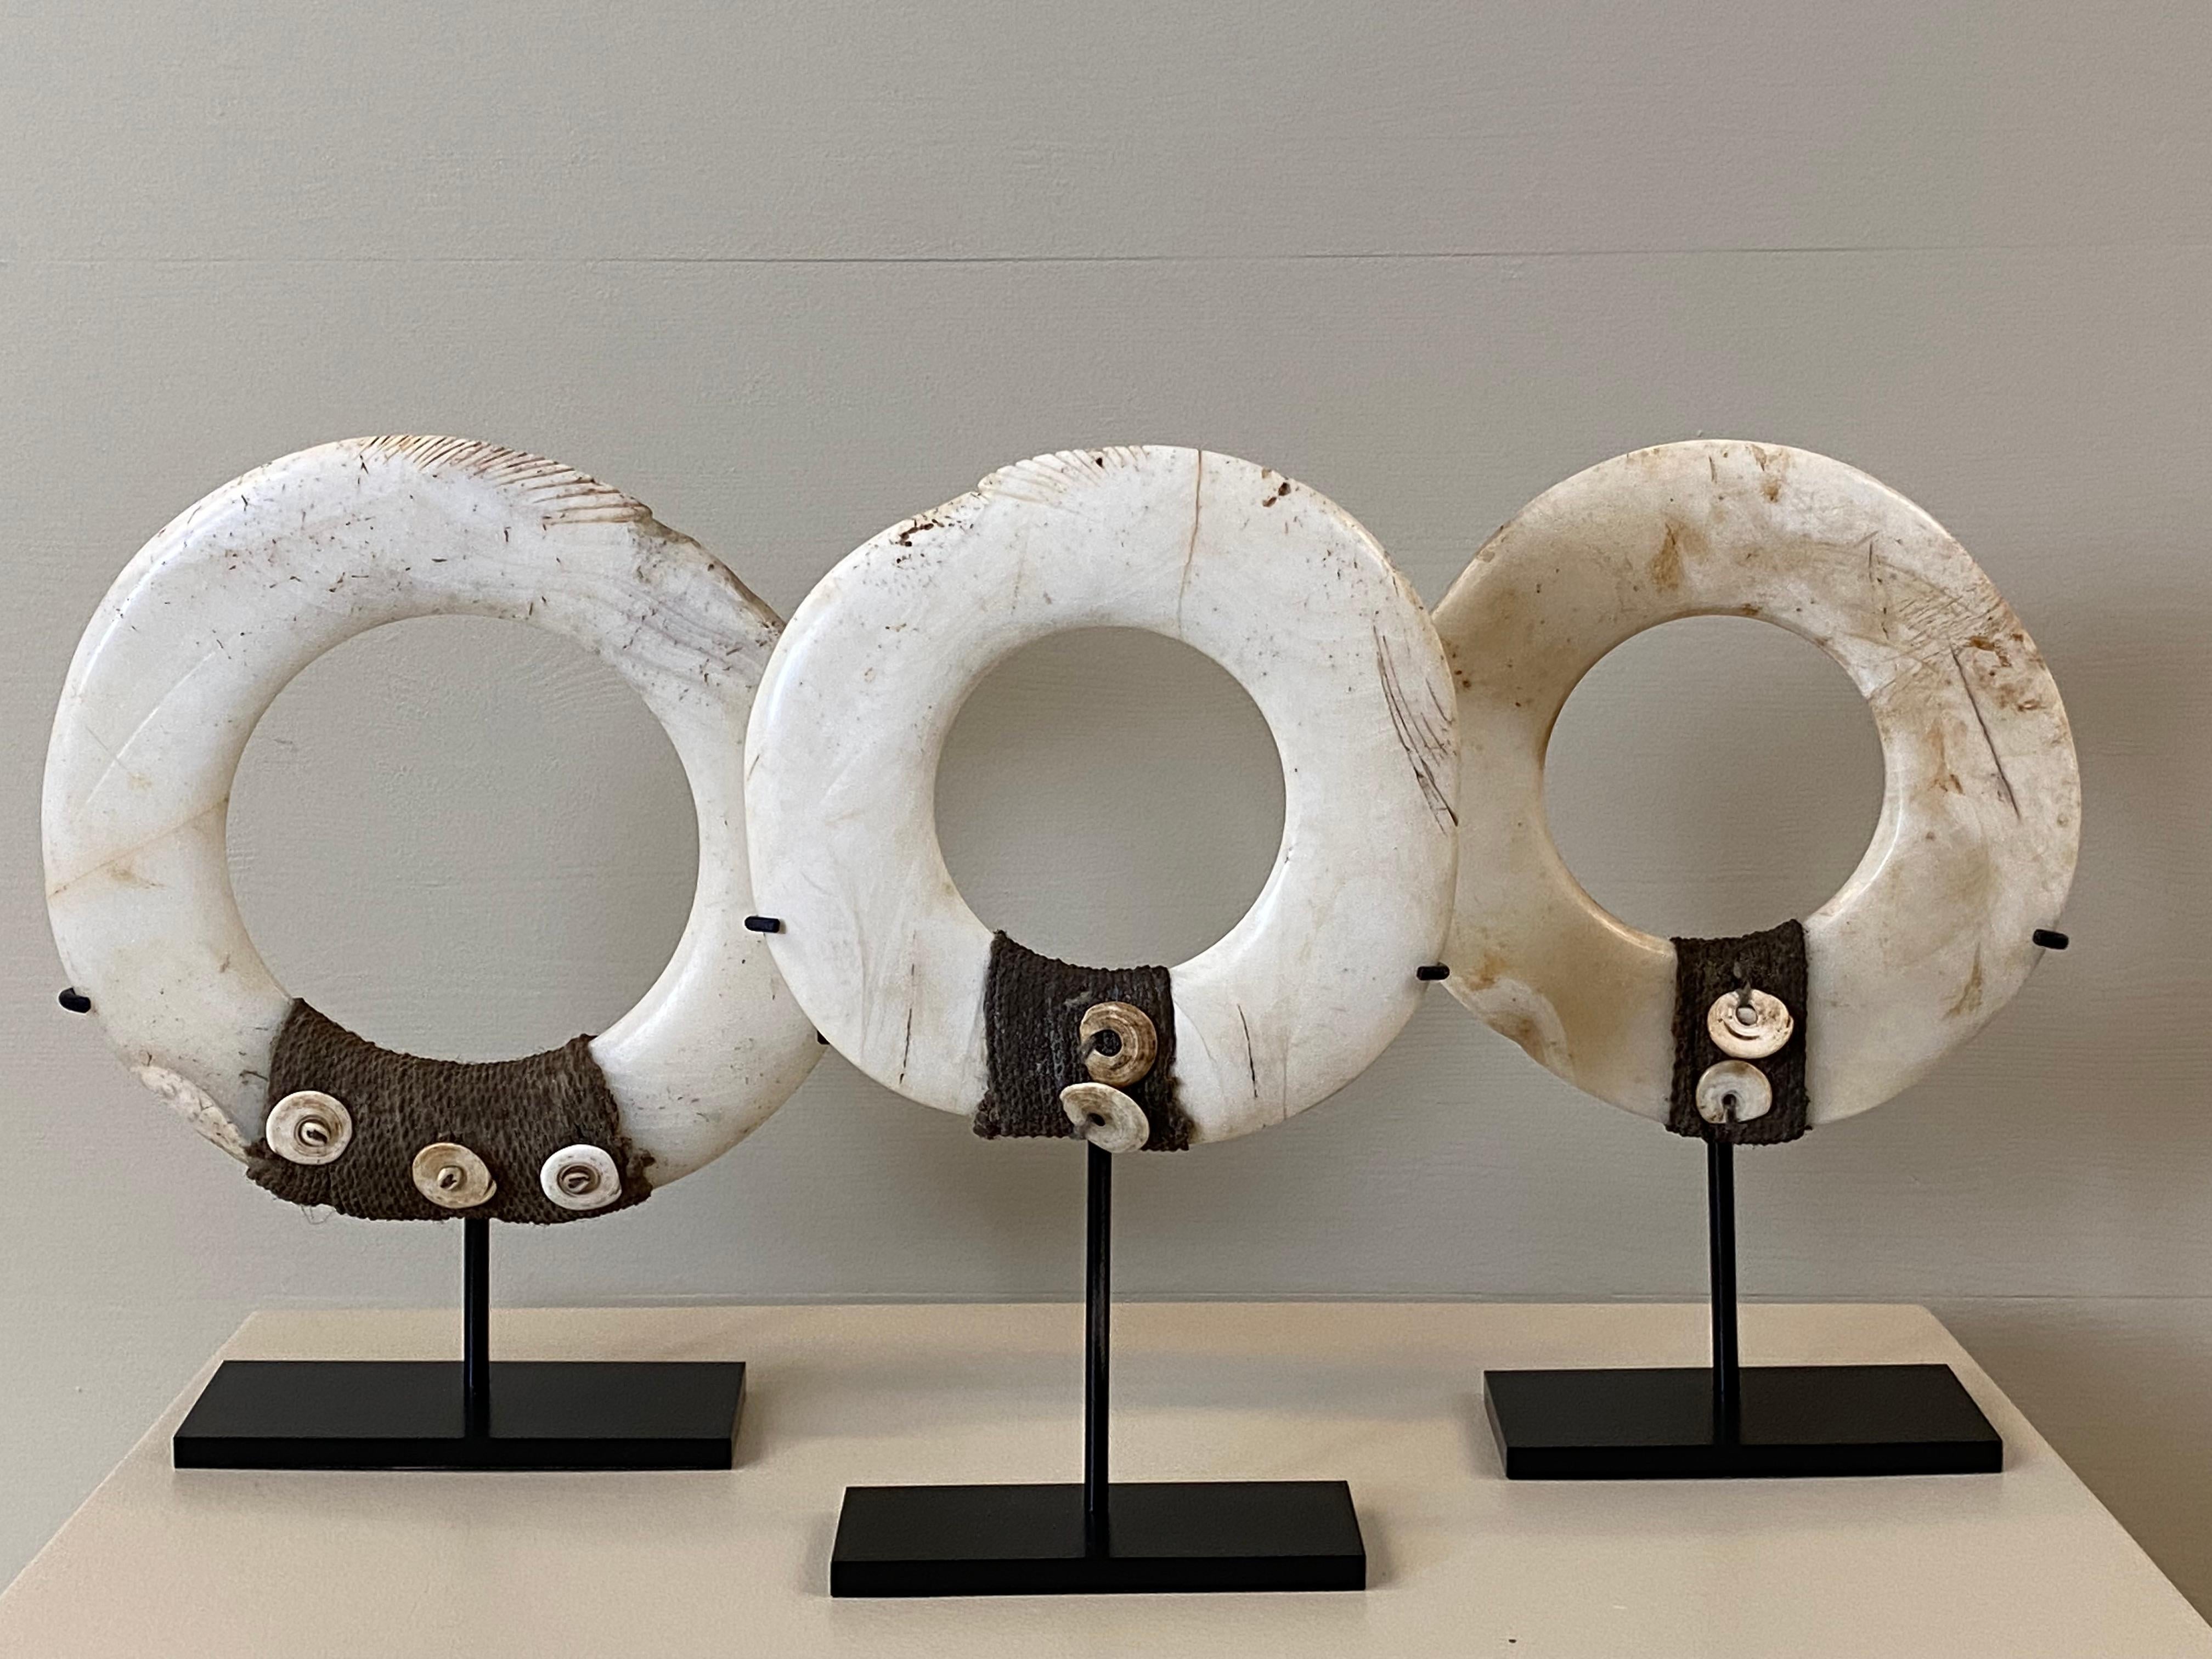 Exceptional set of 3 You Rings from Papua New Guinea
decorated with shells and cords, used as exchange objects
made of the Tridacna Gigas Shell,
different dimensions,
mounted on an iron stand,
32 cm x 26 cm diameter
32 cm x 22 cm diameter
33 cm x 20